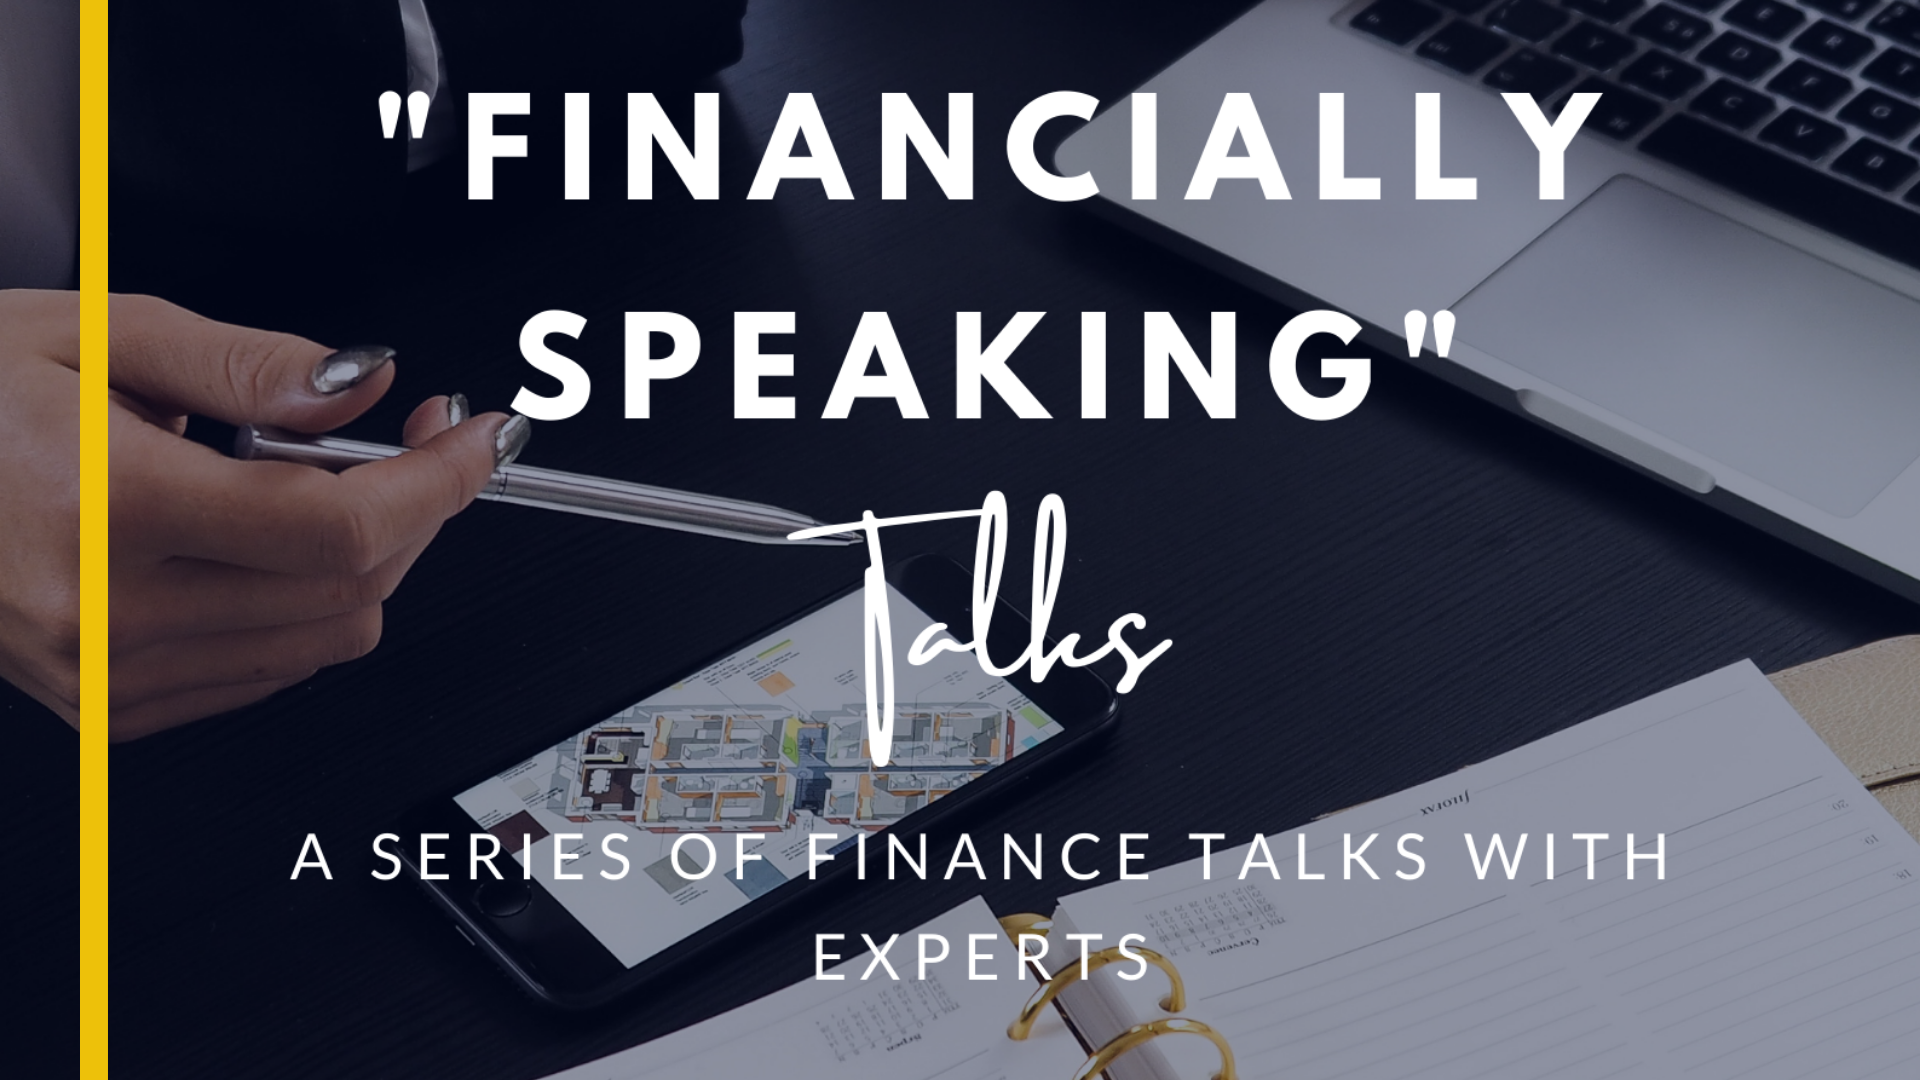 Learning about Finance: The Podcast Way!